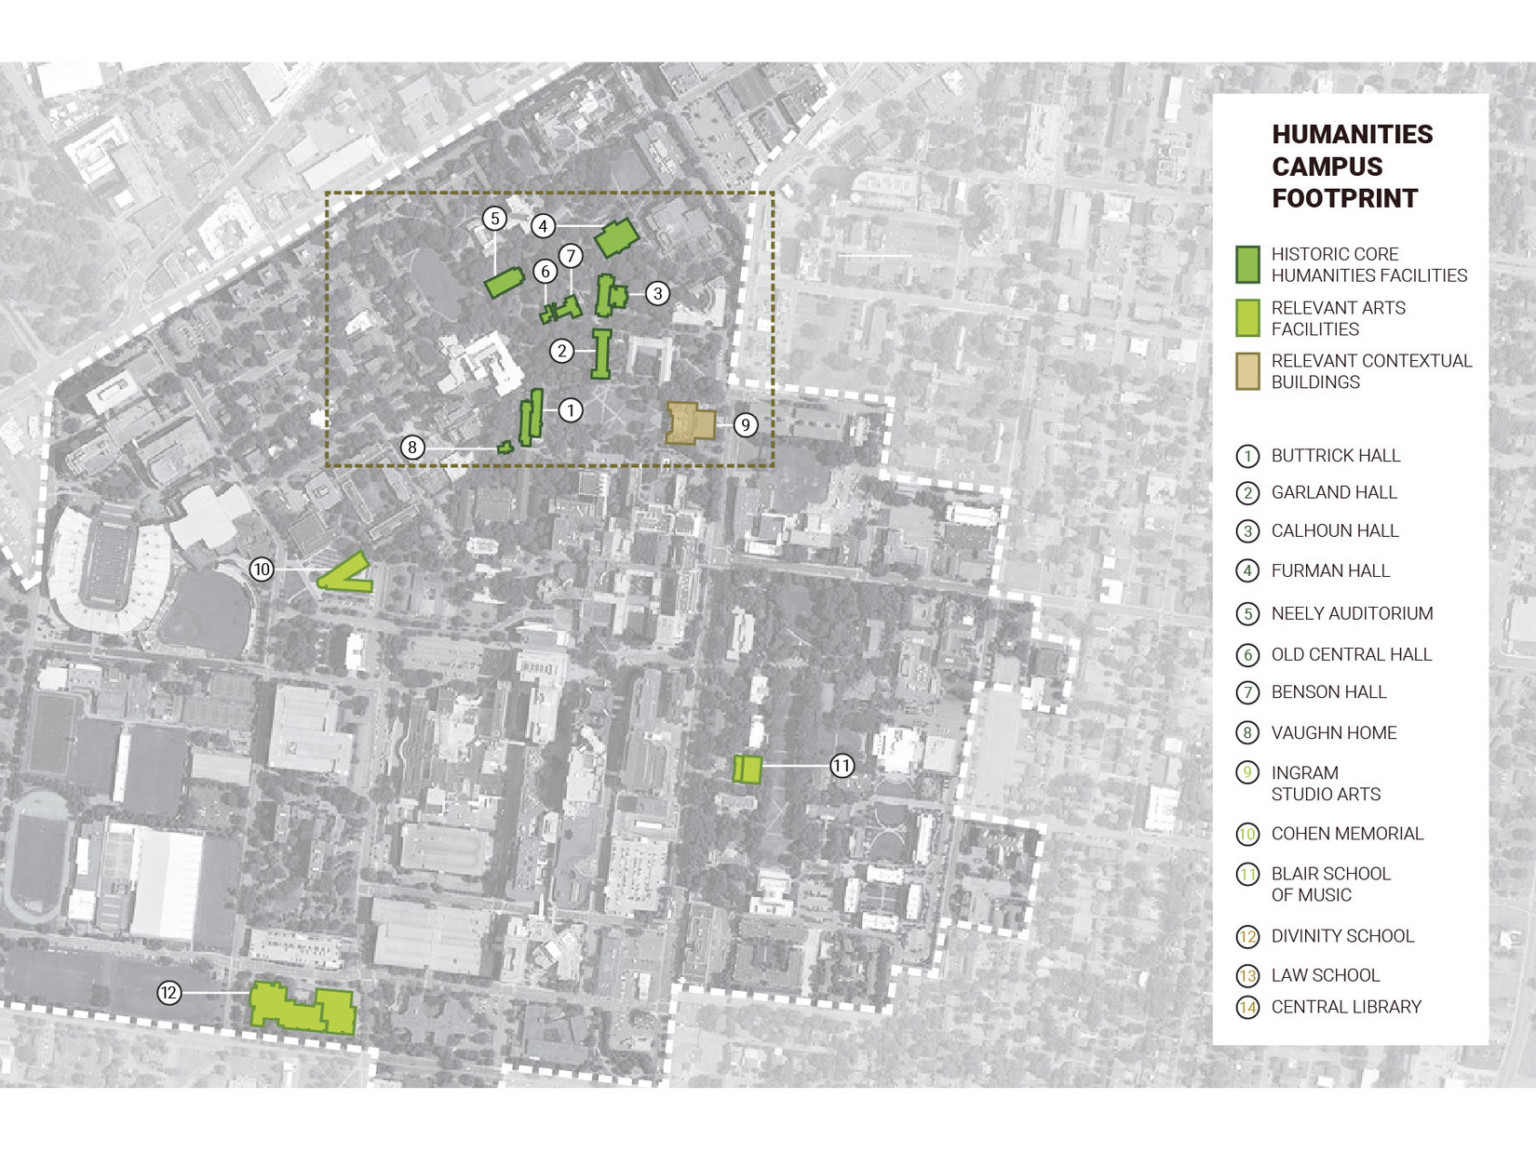 Map of site with color coding for humanities, arts, and contextual buildings, a legend on right side with building details